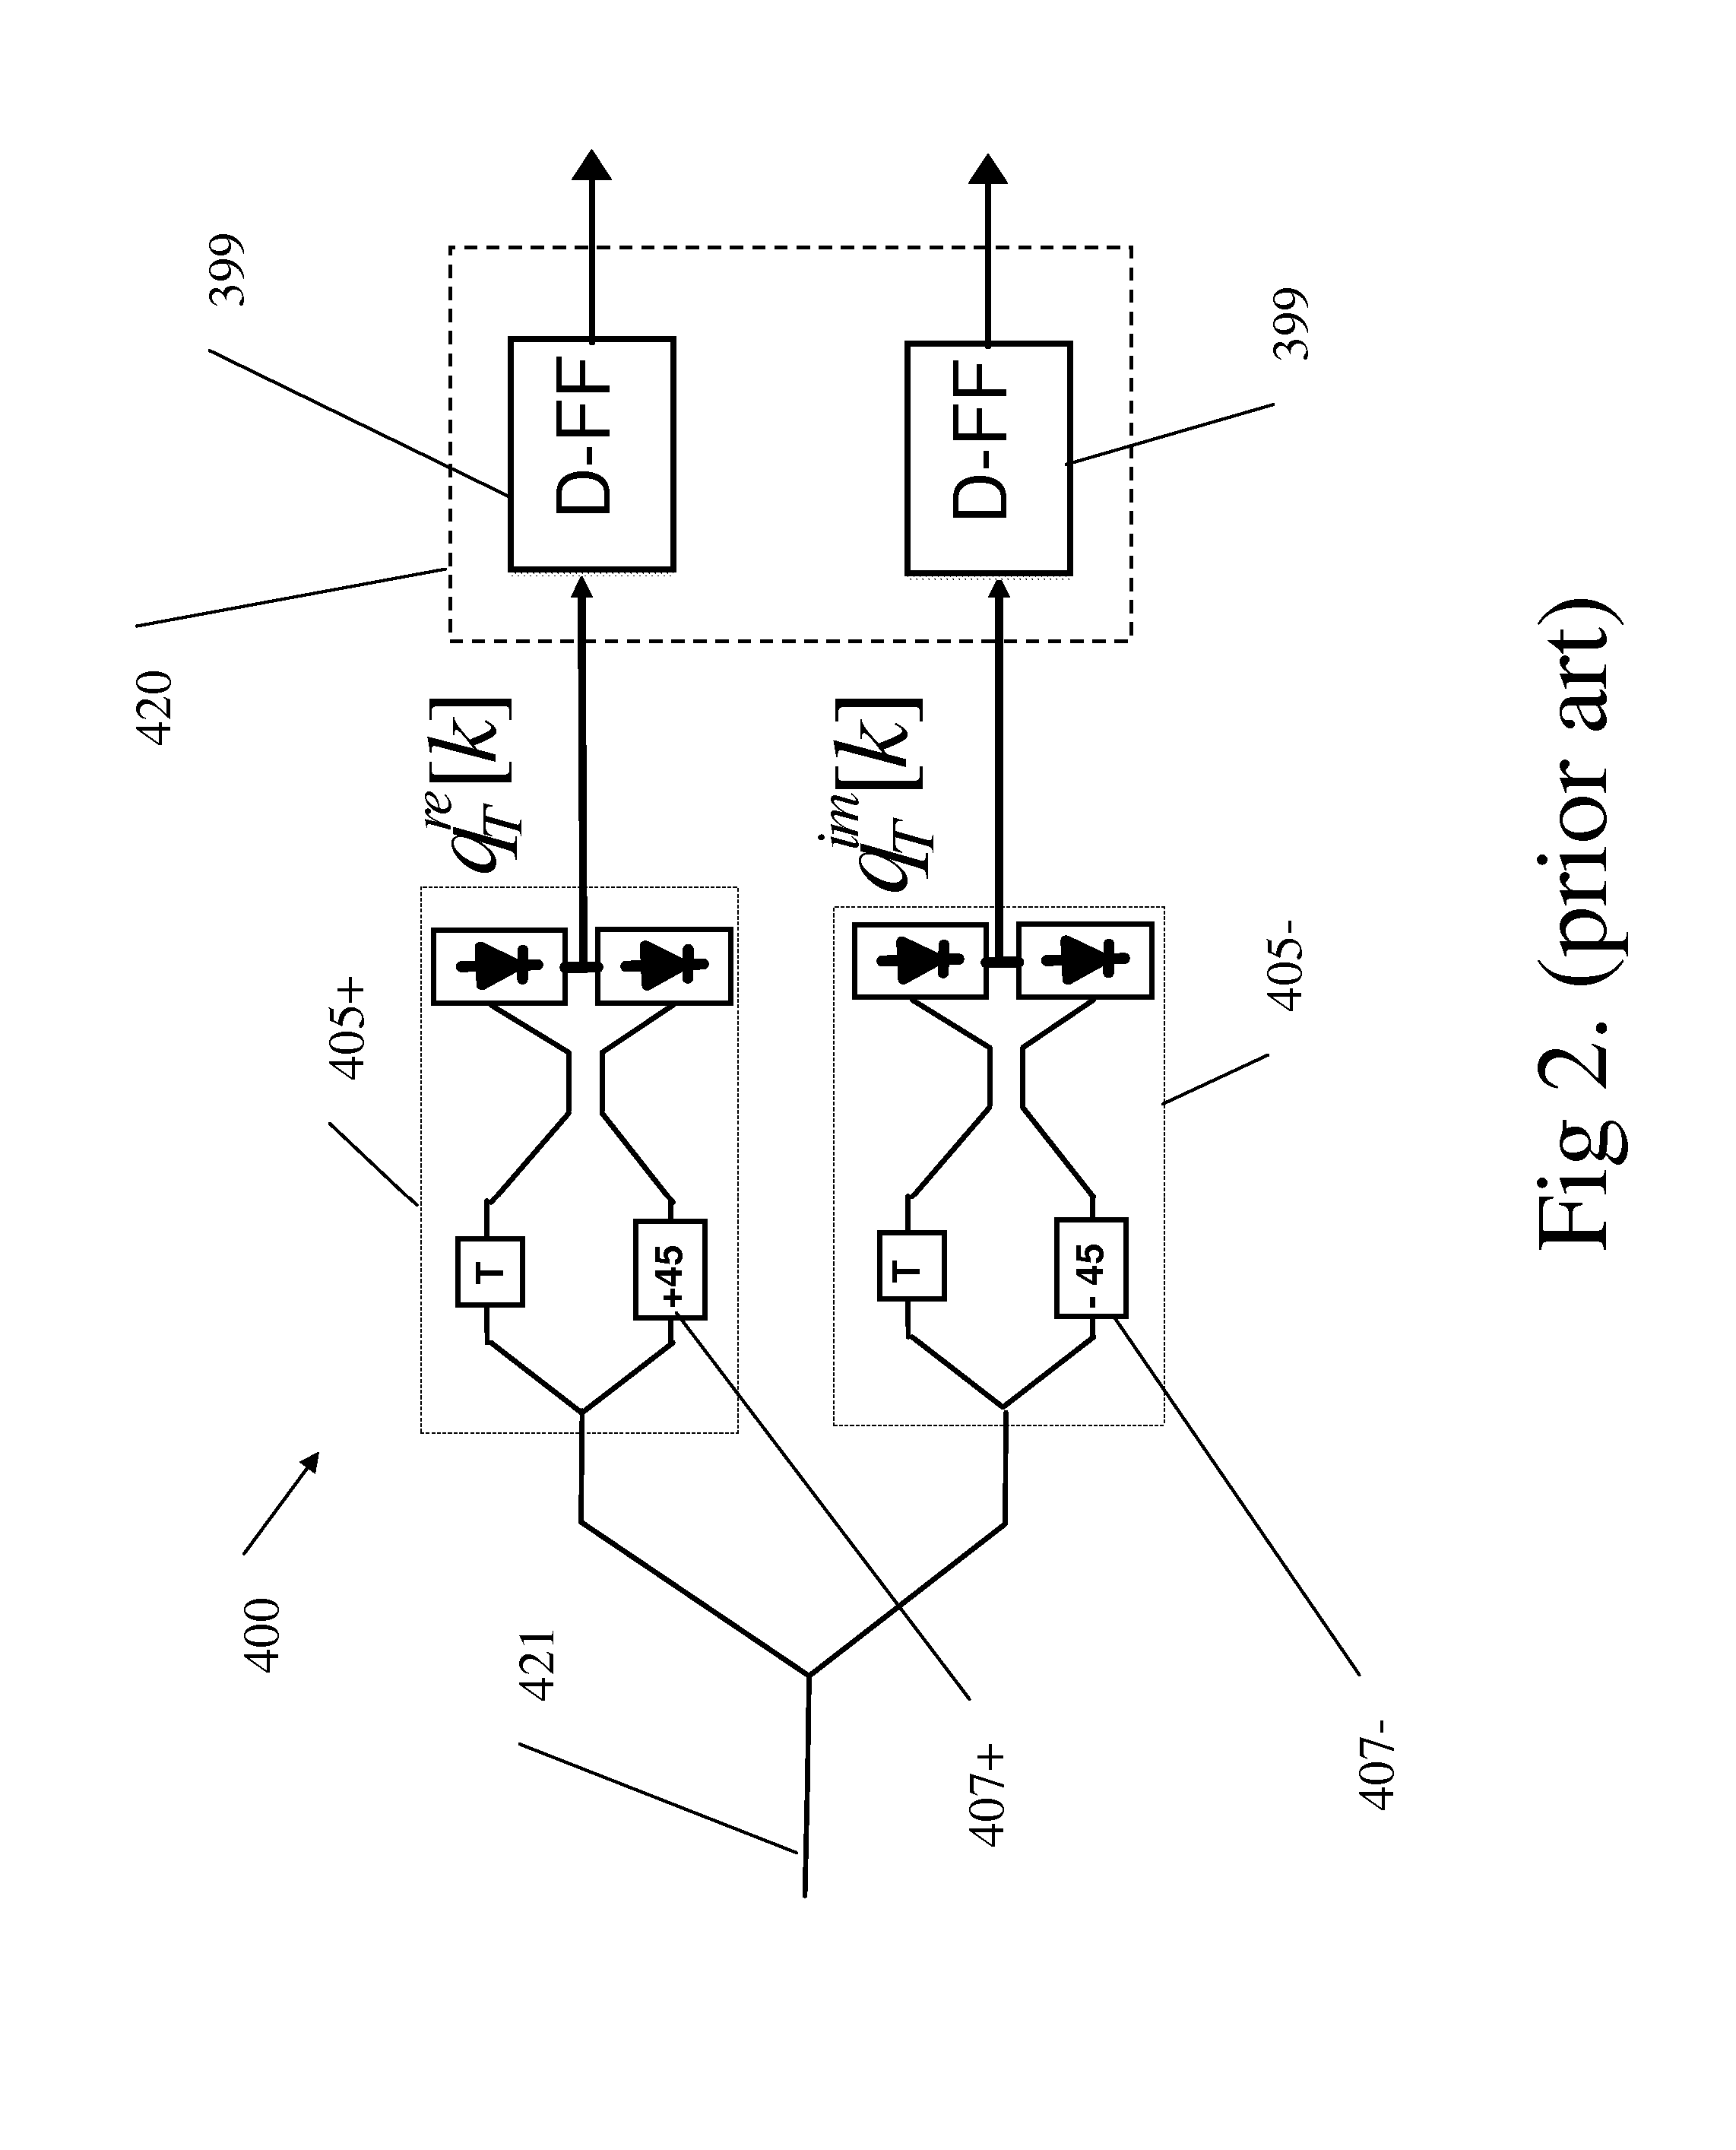 Optical differential phase shift keying receivers with multi-symbol decision feedback-based electro-optic front-end processing